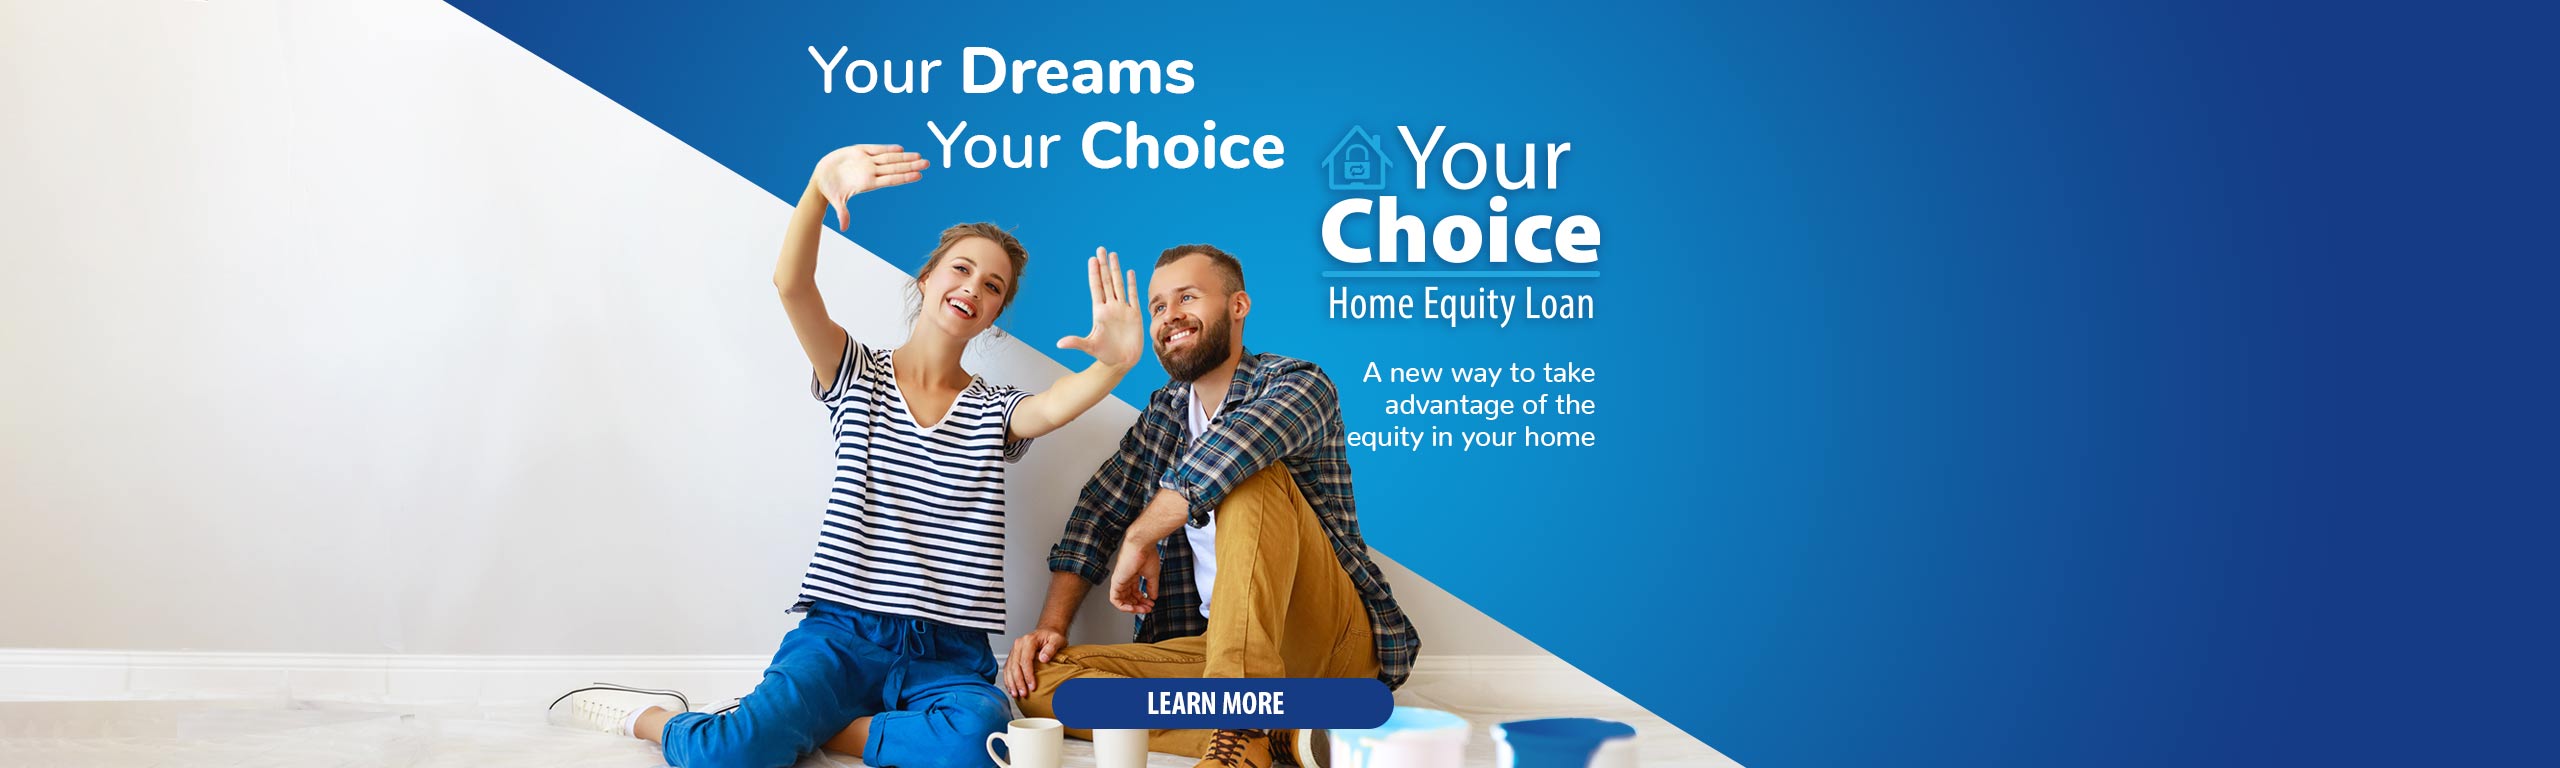 Your Dreams, Your Choice. Your Choice Home equity Loan.